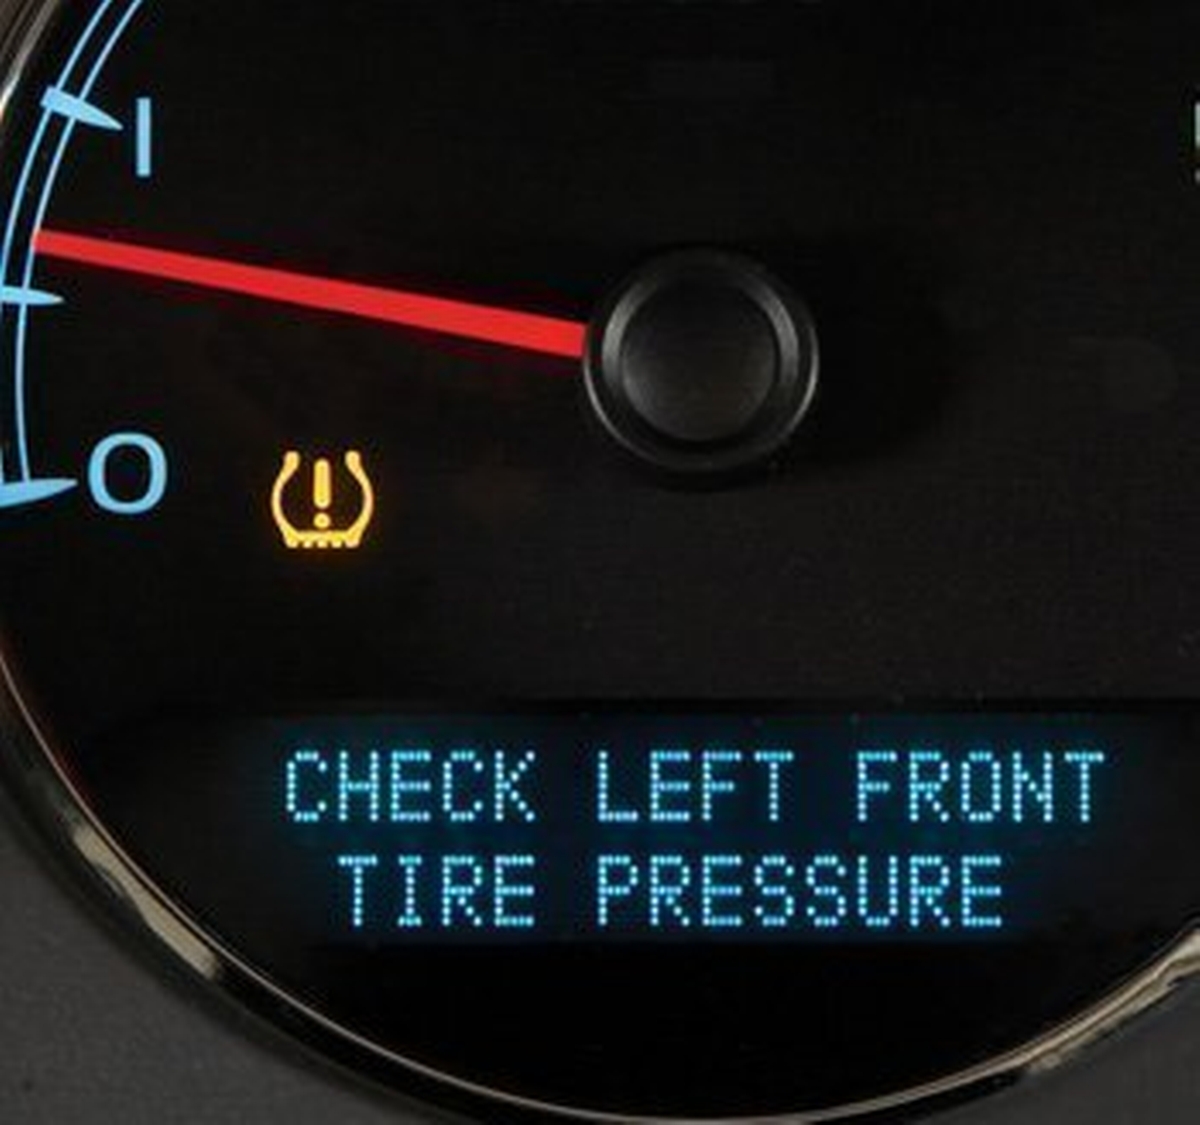 Why Does Cold Air Deflate My Tires?